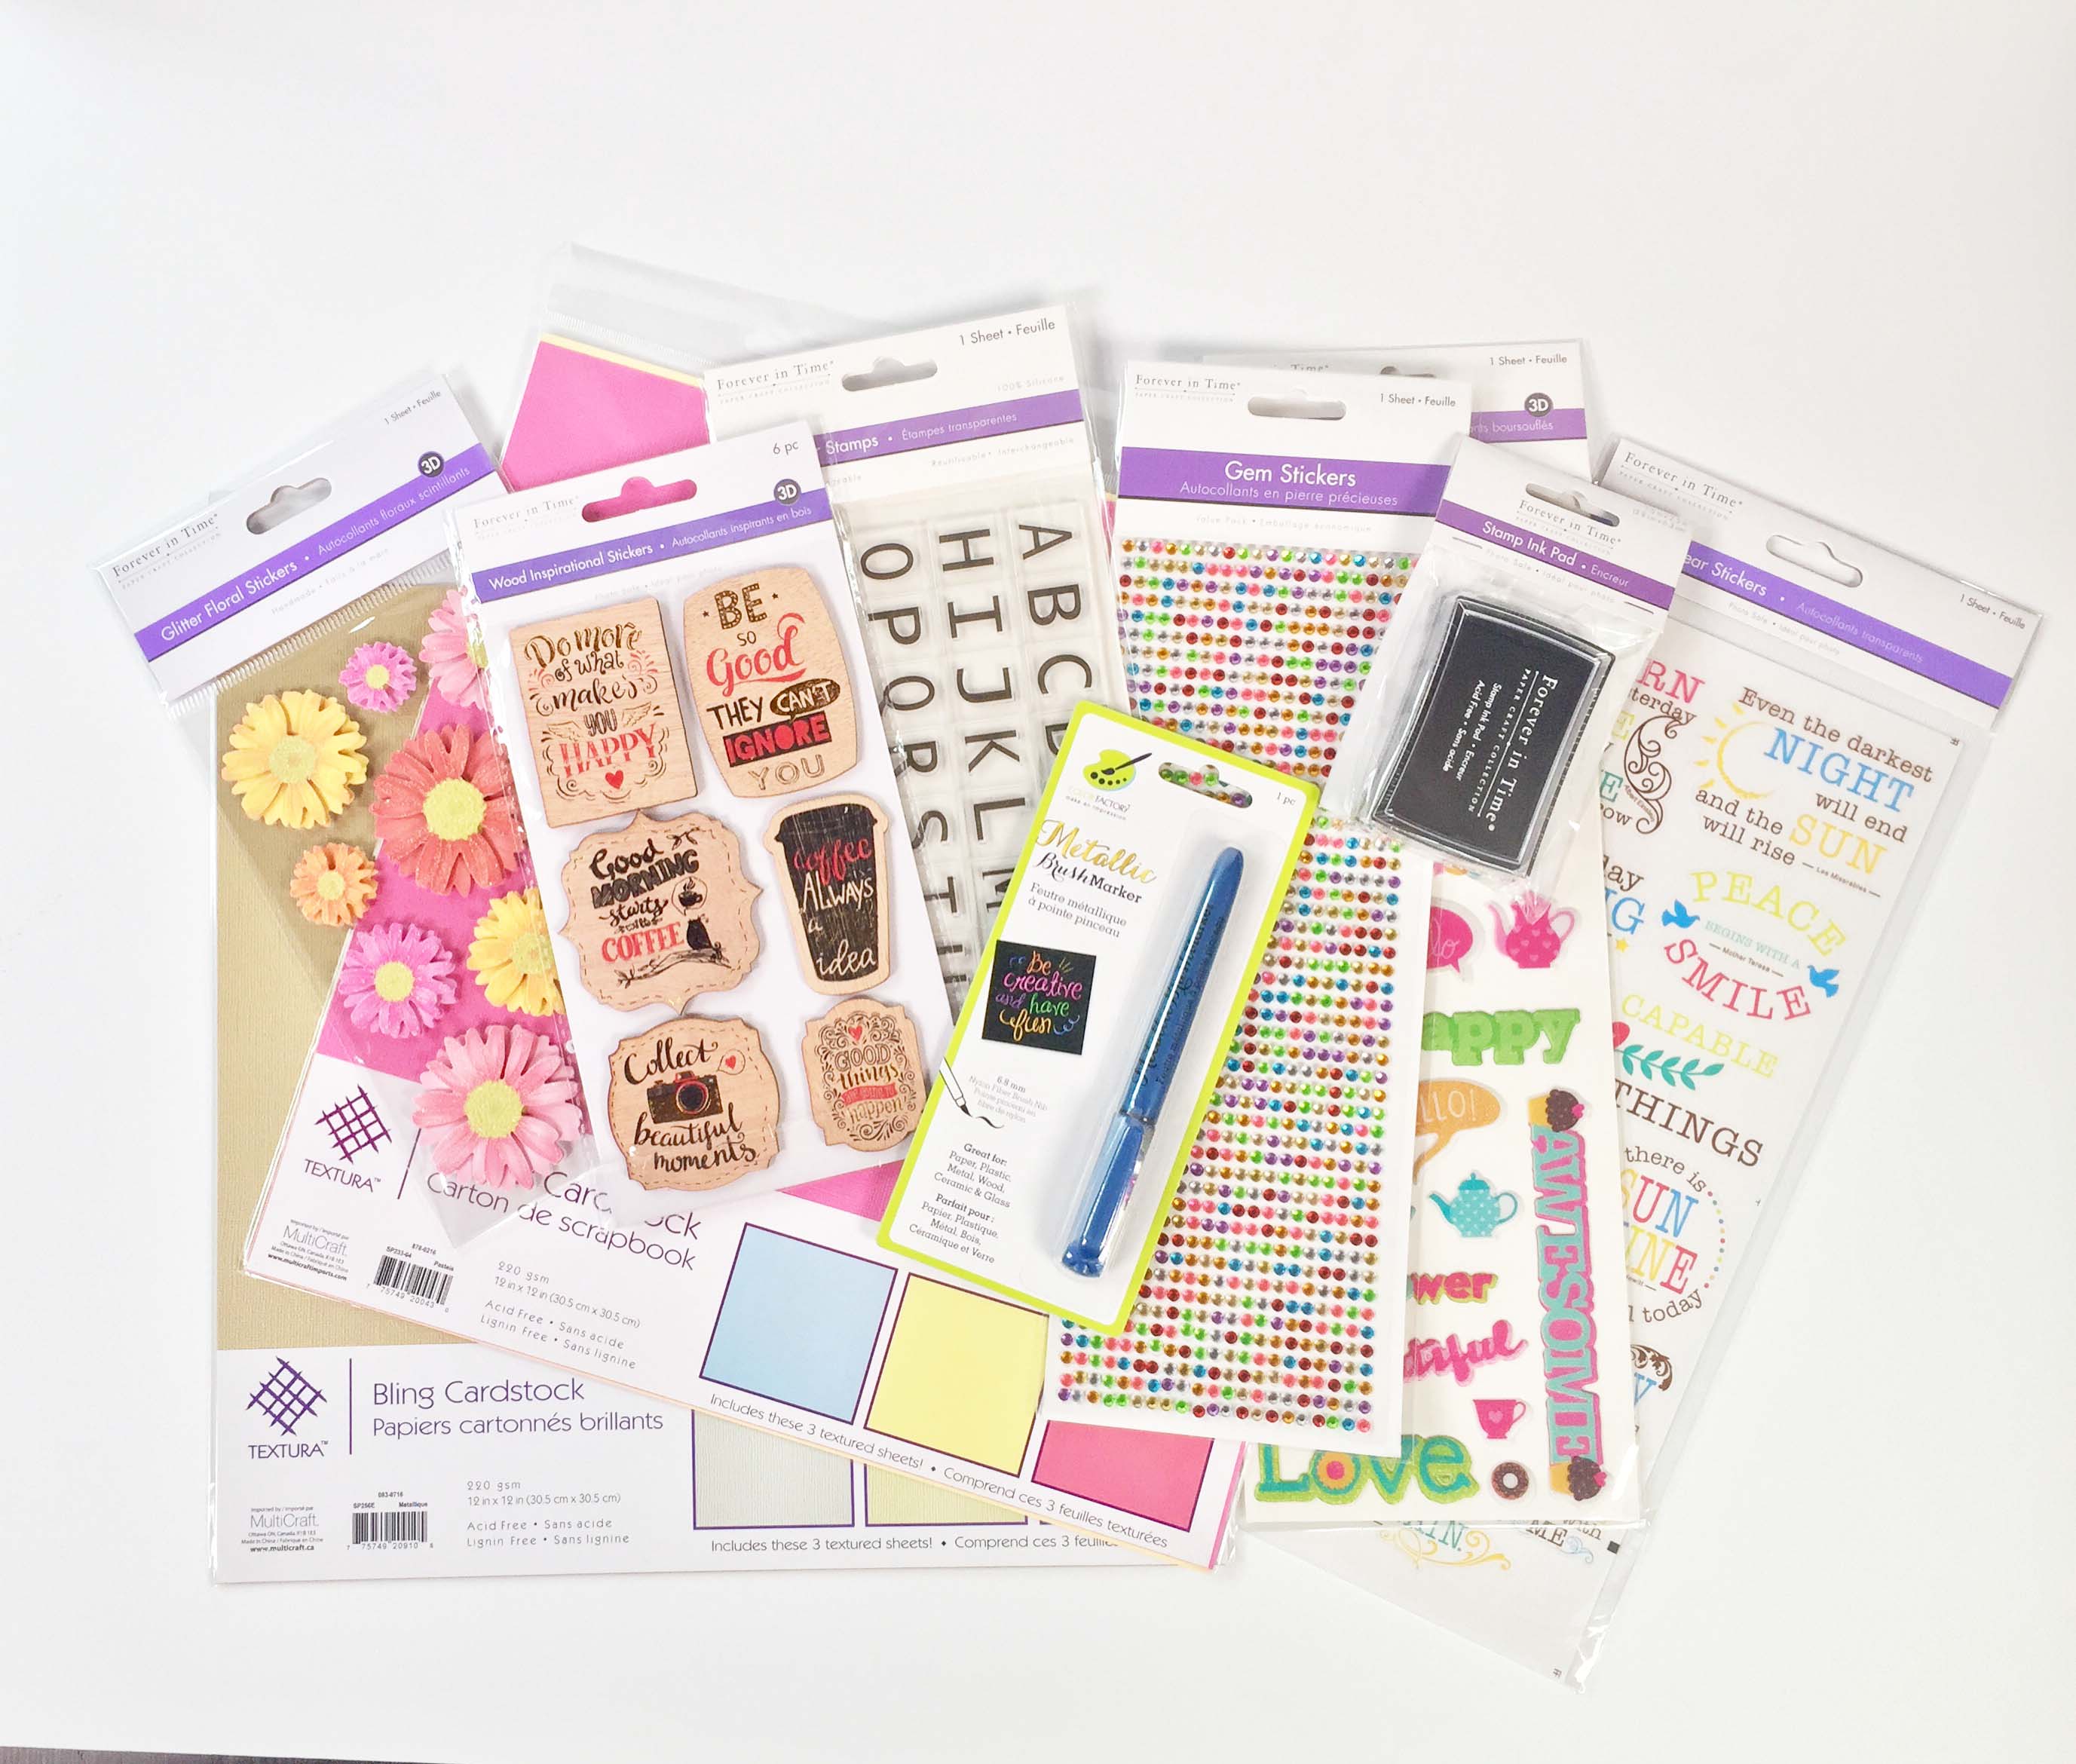 A collection of paper crafting products from MultiCraft Forever in Time including stickers, patterned paper, cardstock, ink, pens, alphabet stamps and flower die cut stickers.